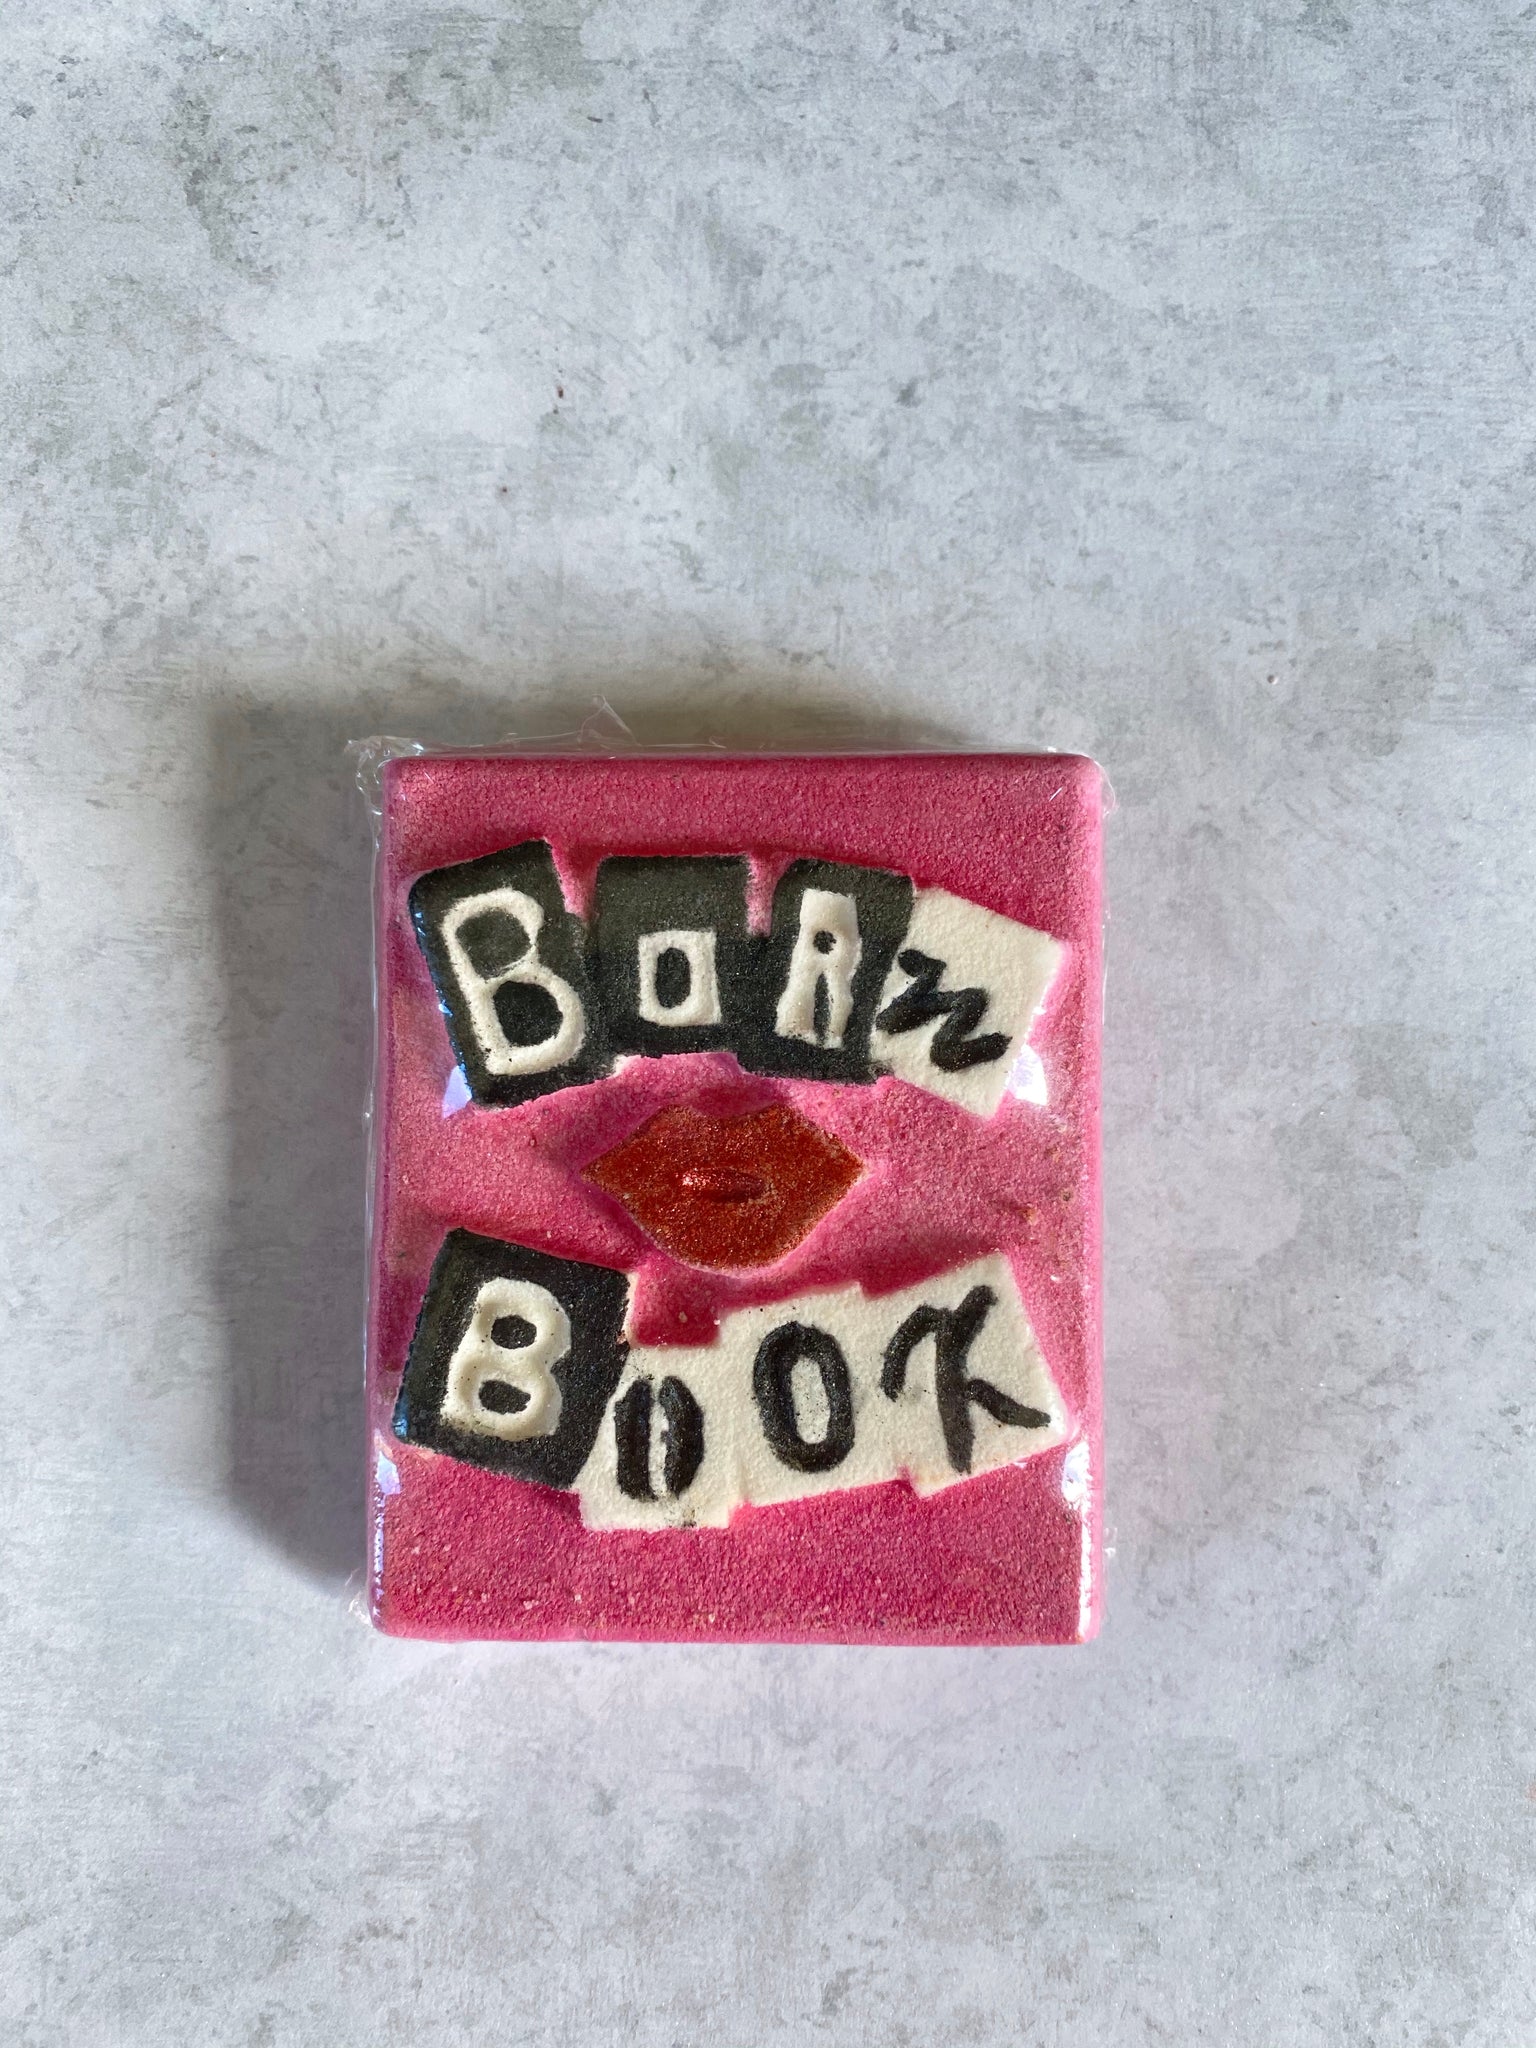 Bath Bomb that Looks Like the Burn Book from Mean Girls